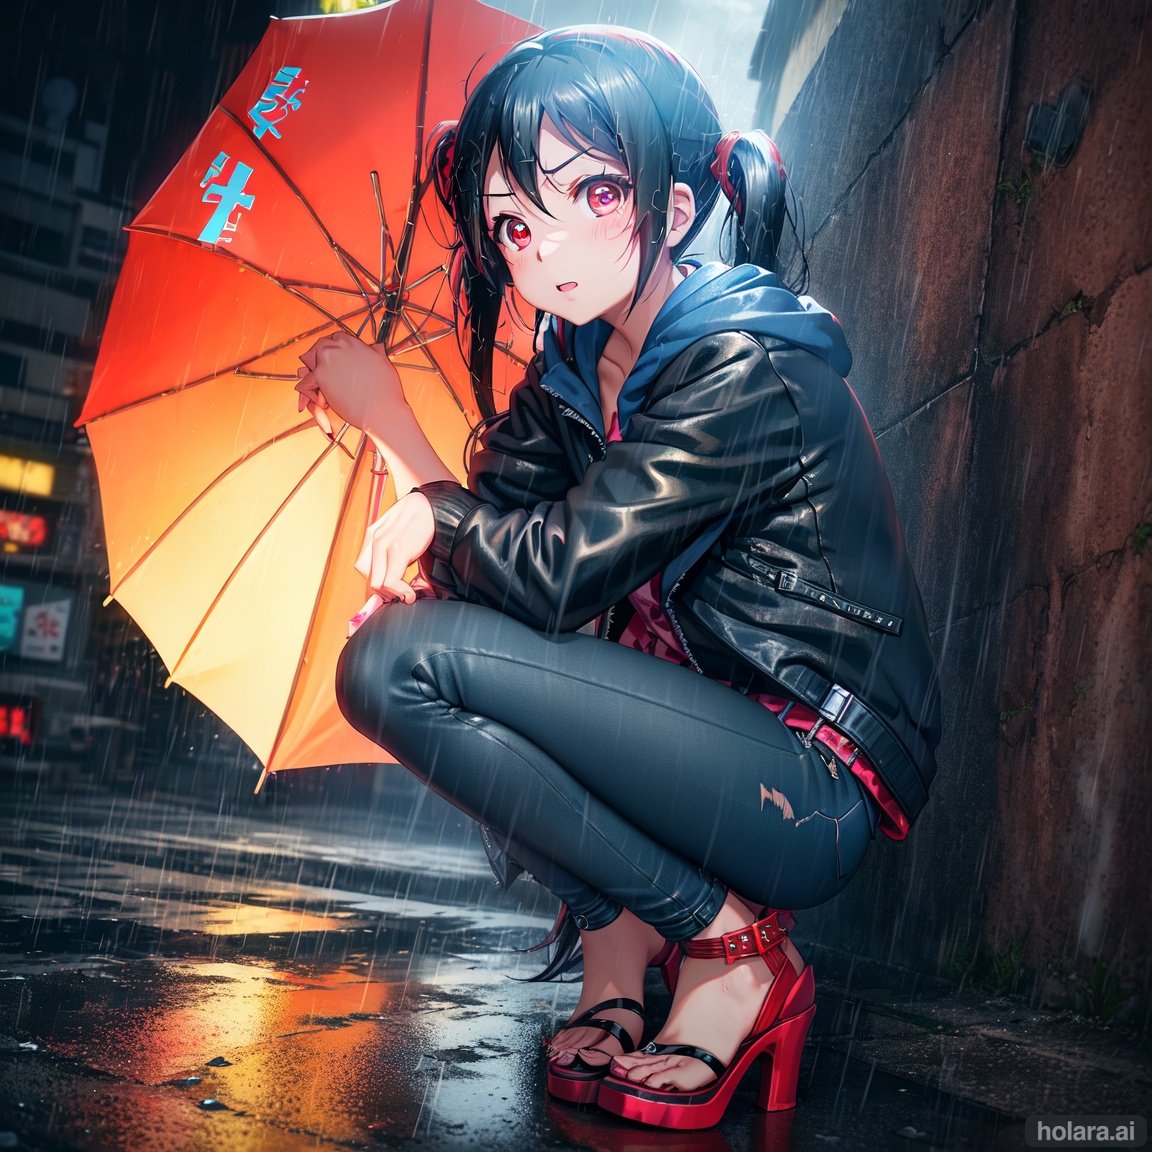 Image of (yazawa nico)+++,(lovelive)+++,1girl,solo,angry,(pigtails)+++,(darkblue hoodie)+++,(leather jacket)+++,layered,(long skinny jeans)+++,belt,(high heel sandals)+++,(scarlet colored eyes)+++,(black hair)+++, looking at camera,crouching++,in alley,(in front of concrete wall)++,(under open umbrella)+,rainstorm+++,side view,(full body visible)++